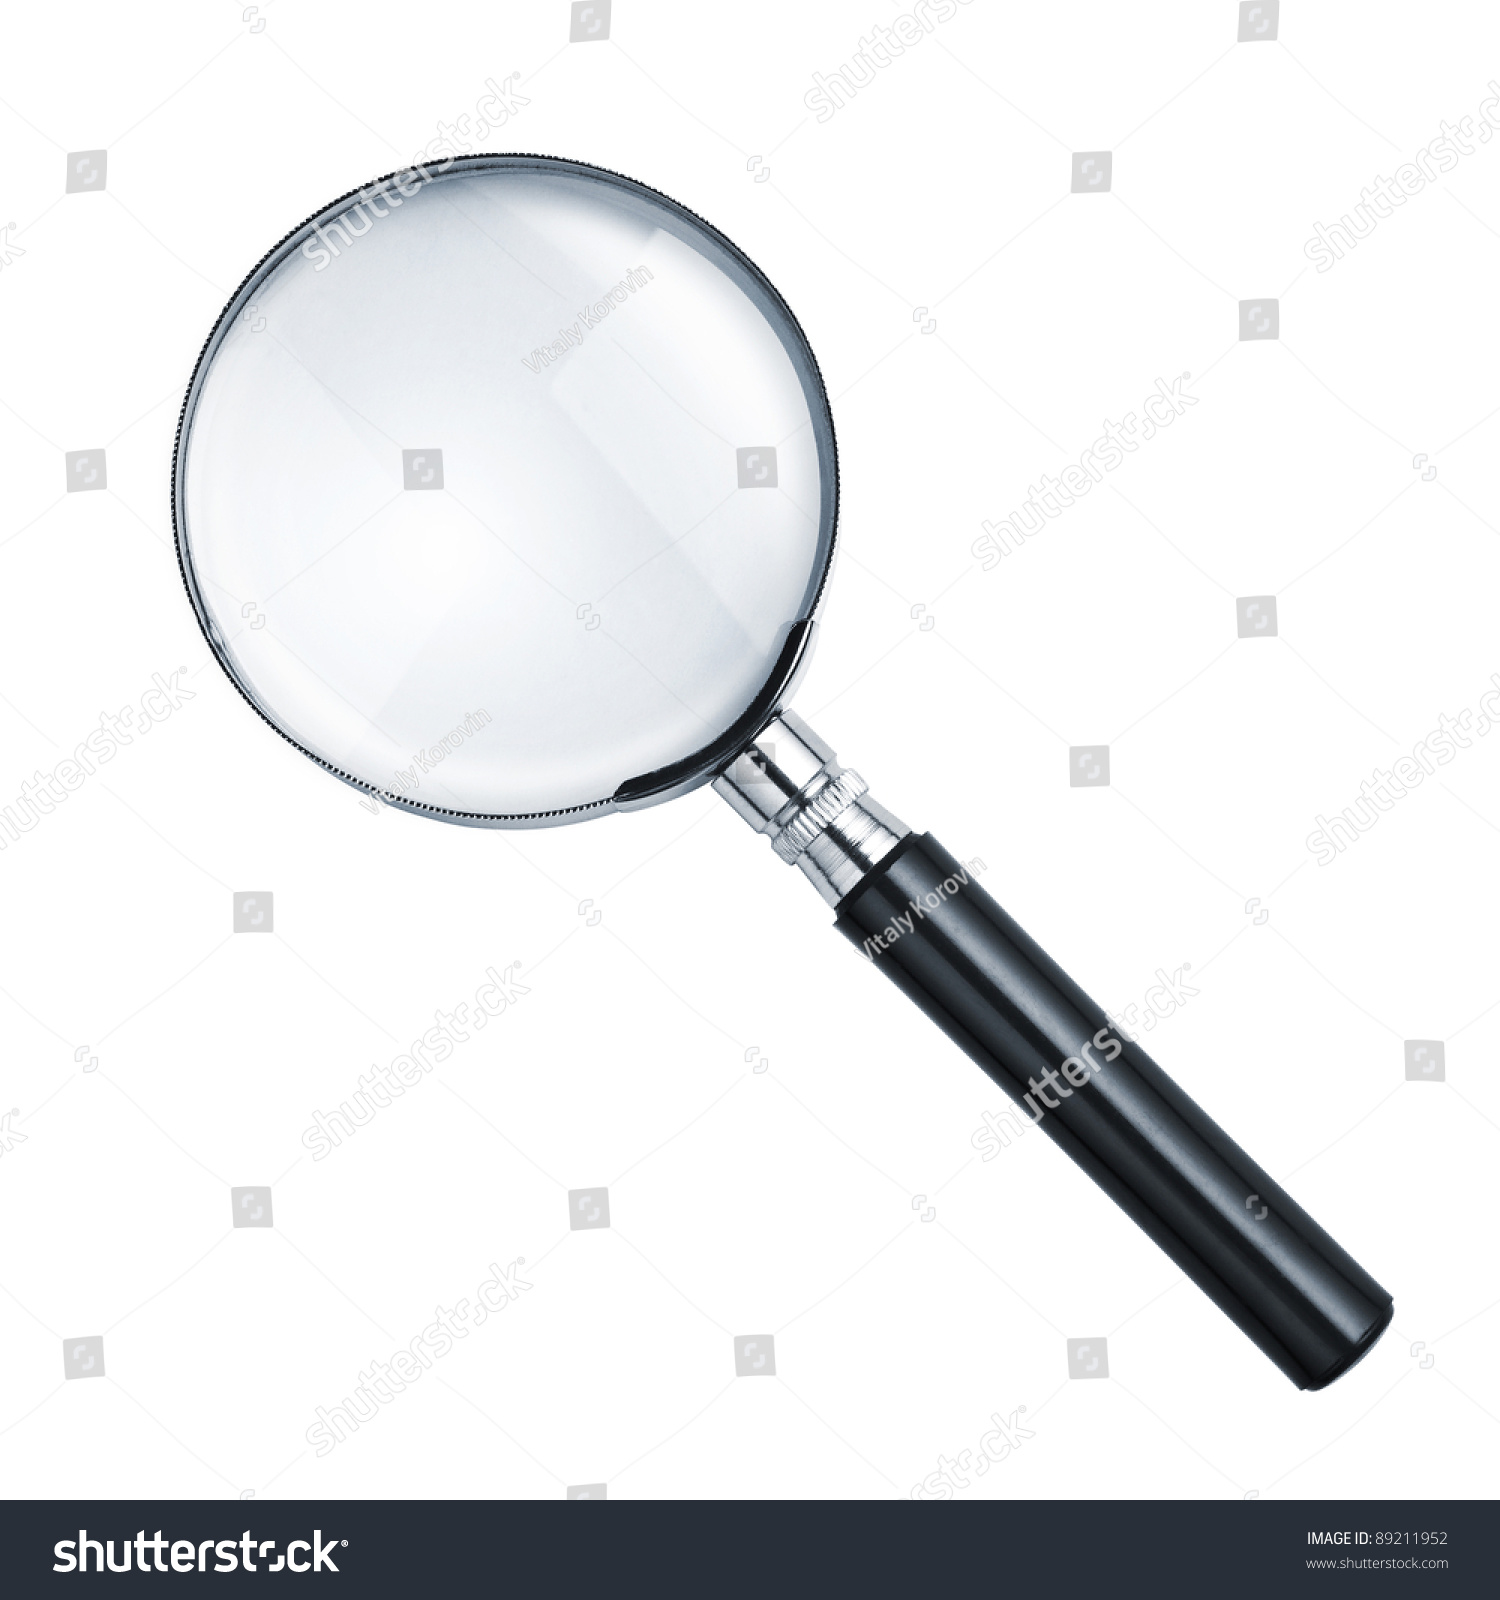 Magnifying glass isolated on white #89211952